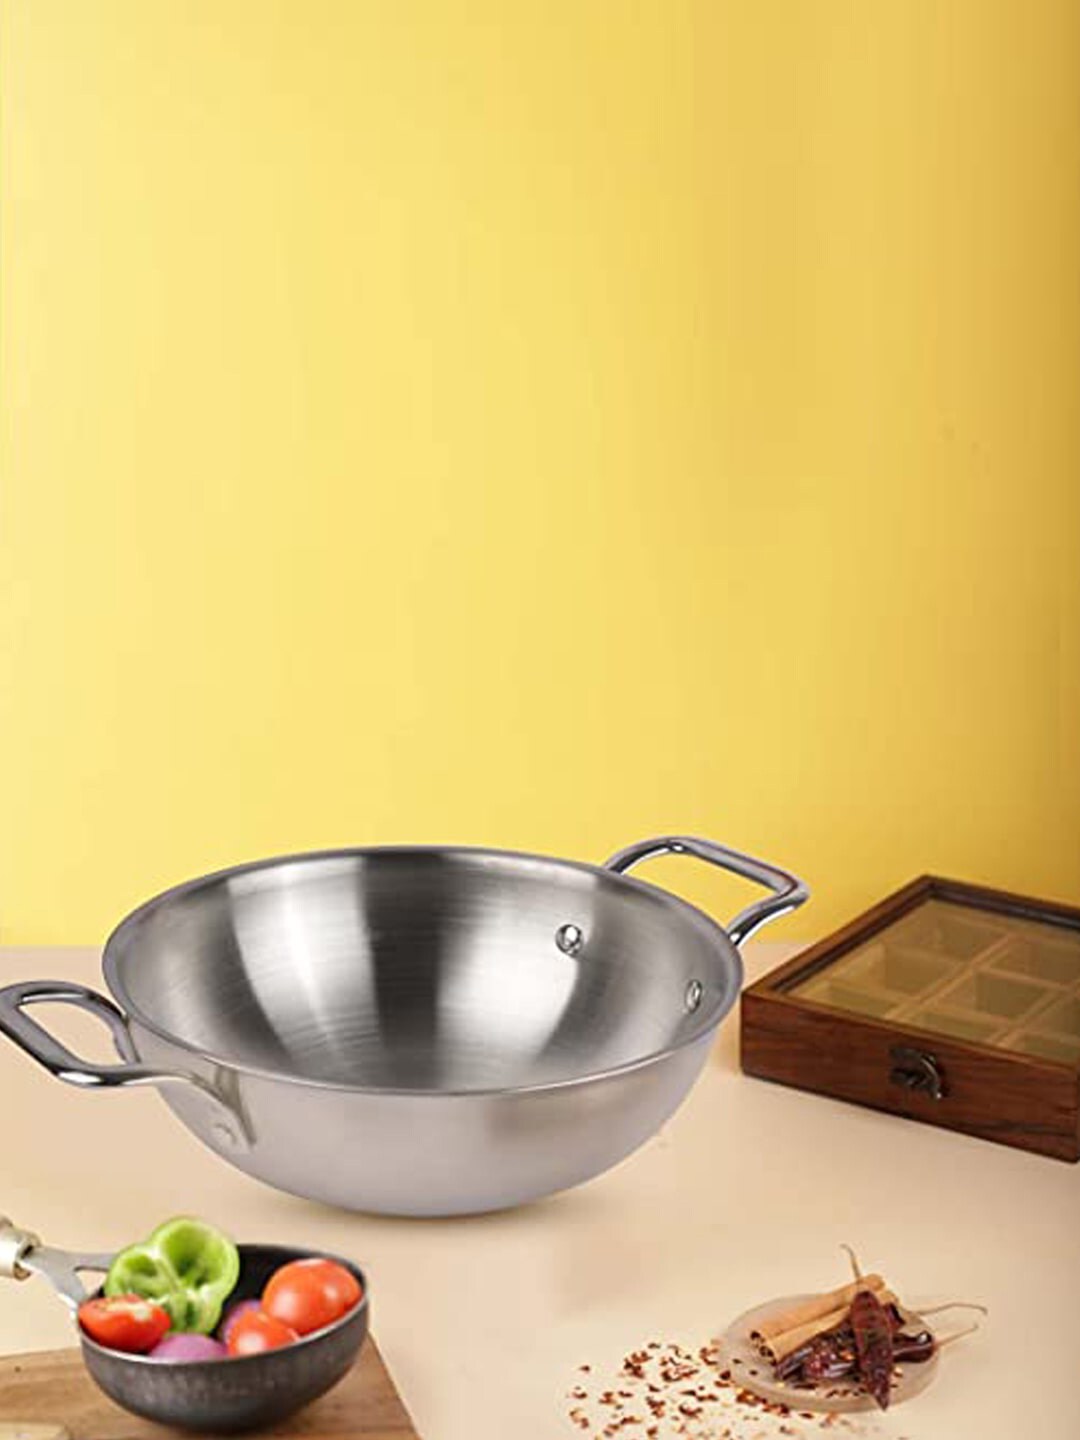 The Indus Valley Solid Stainless-Steel Kadai Price in India